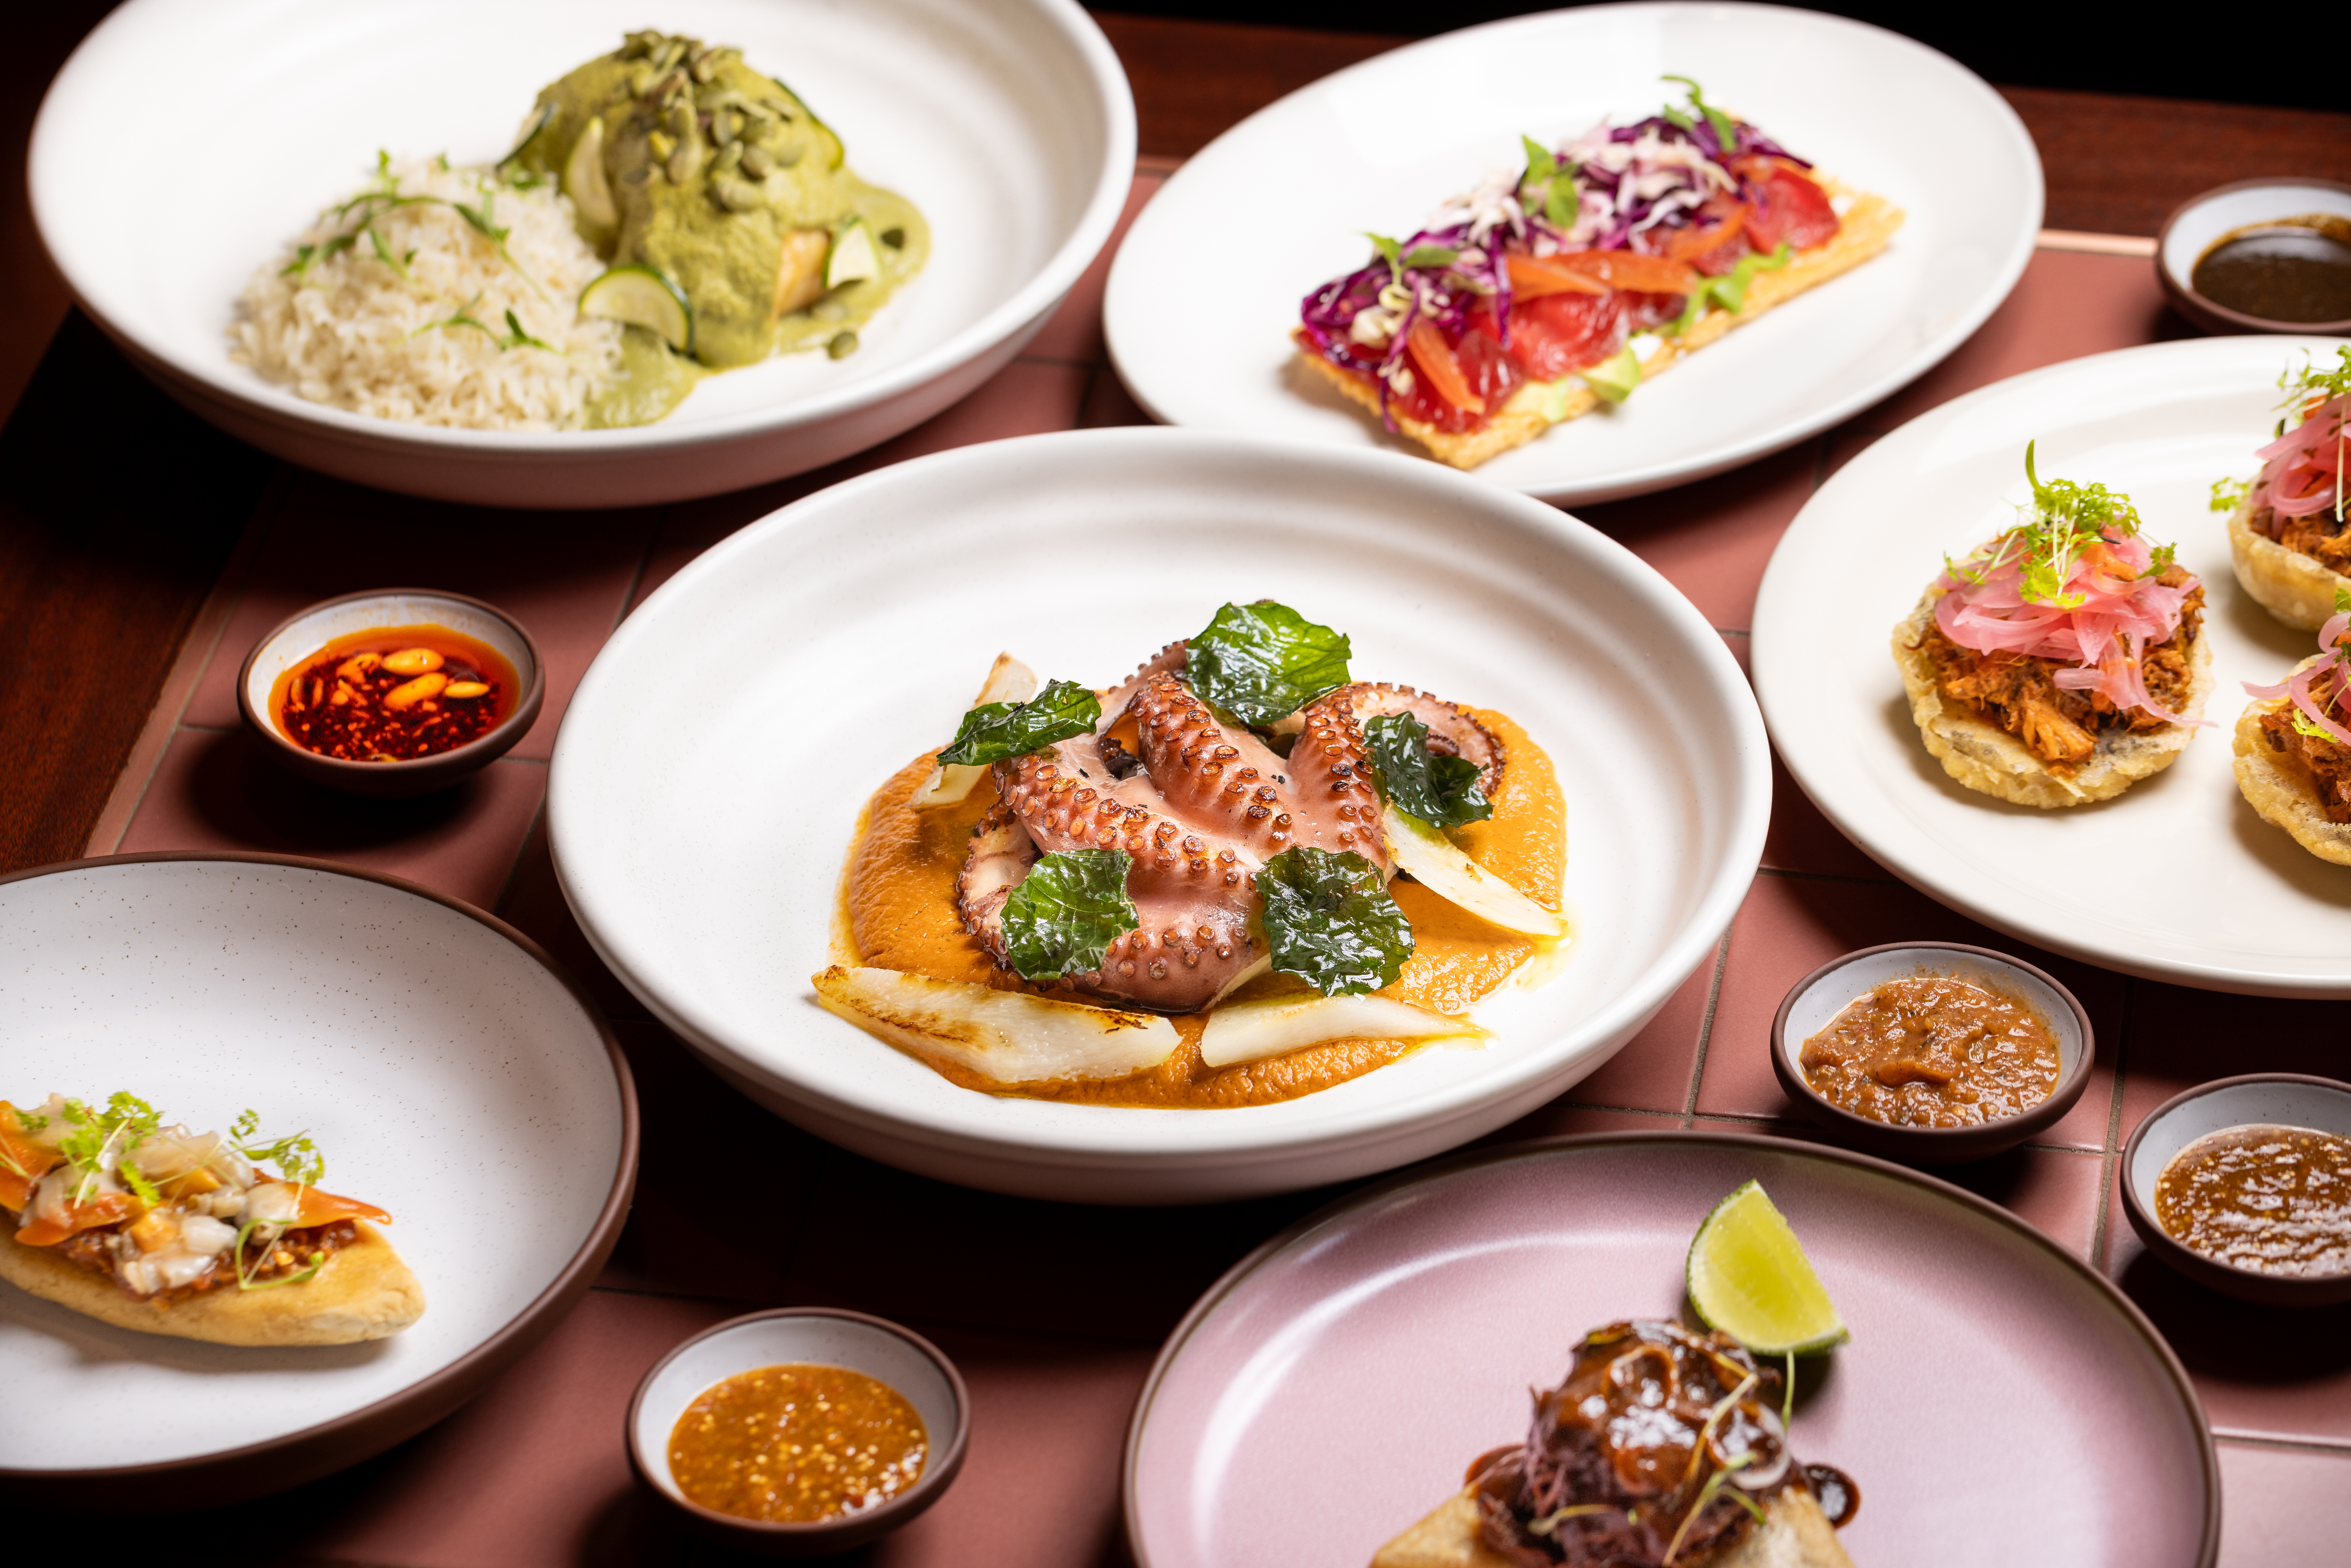 Maizano serves regional plates from the Mexican states of Yucatán, Puebla, and Oaxaca.